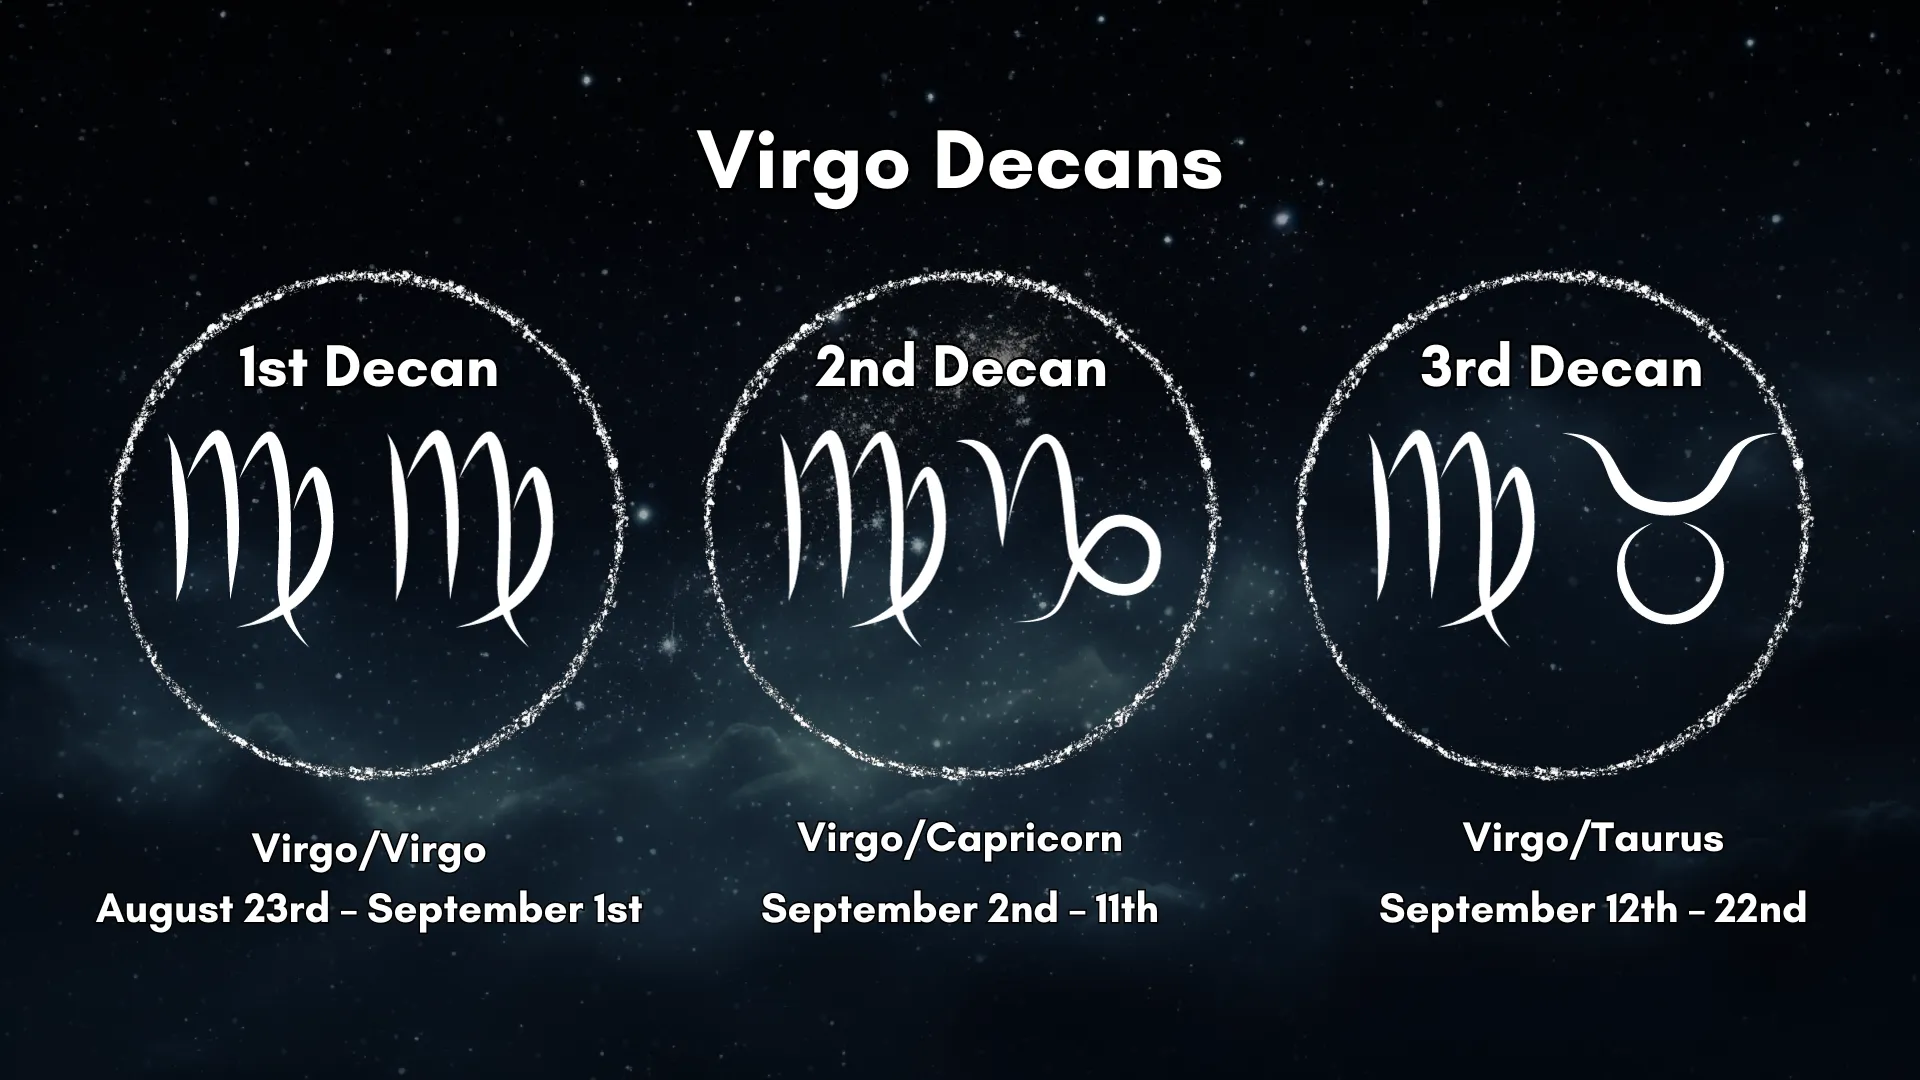 The Virgo Decans are laid out in a chart that is easy to understand.